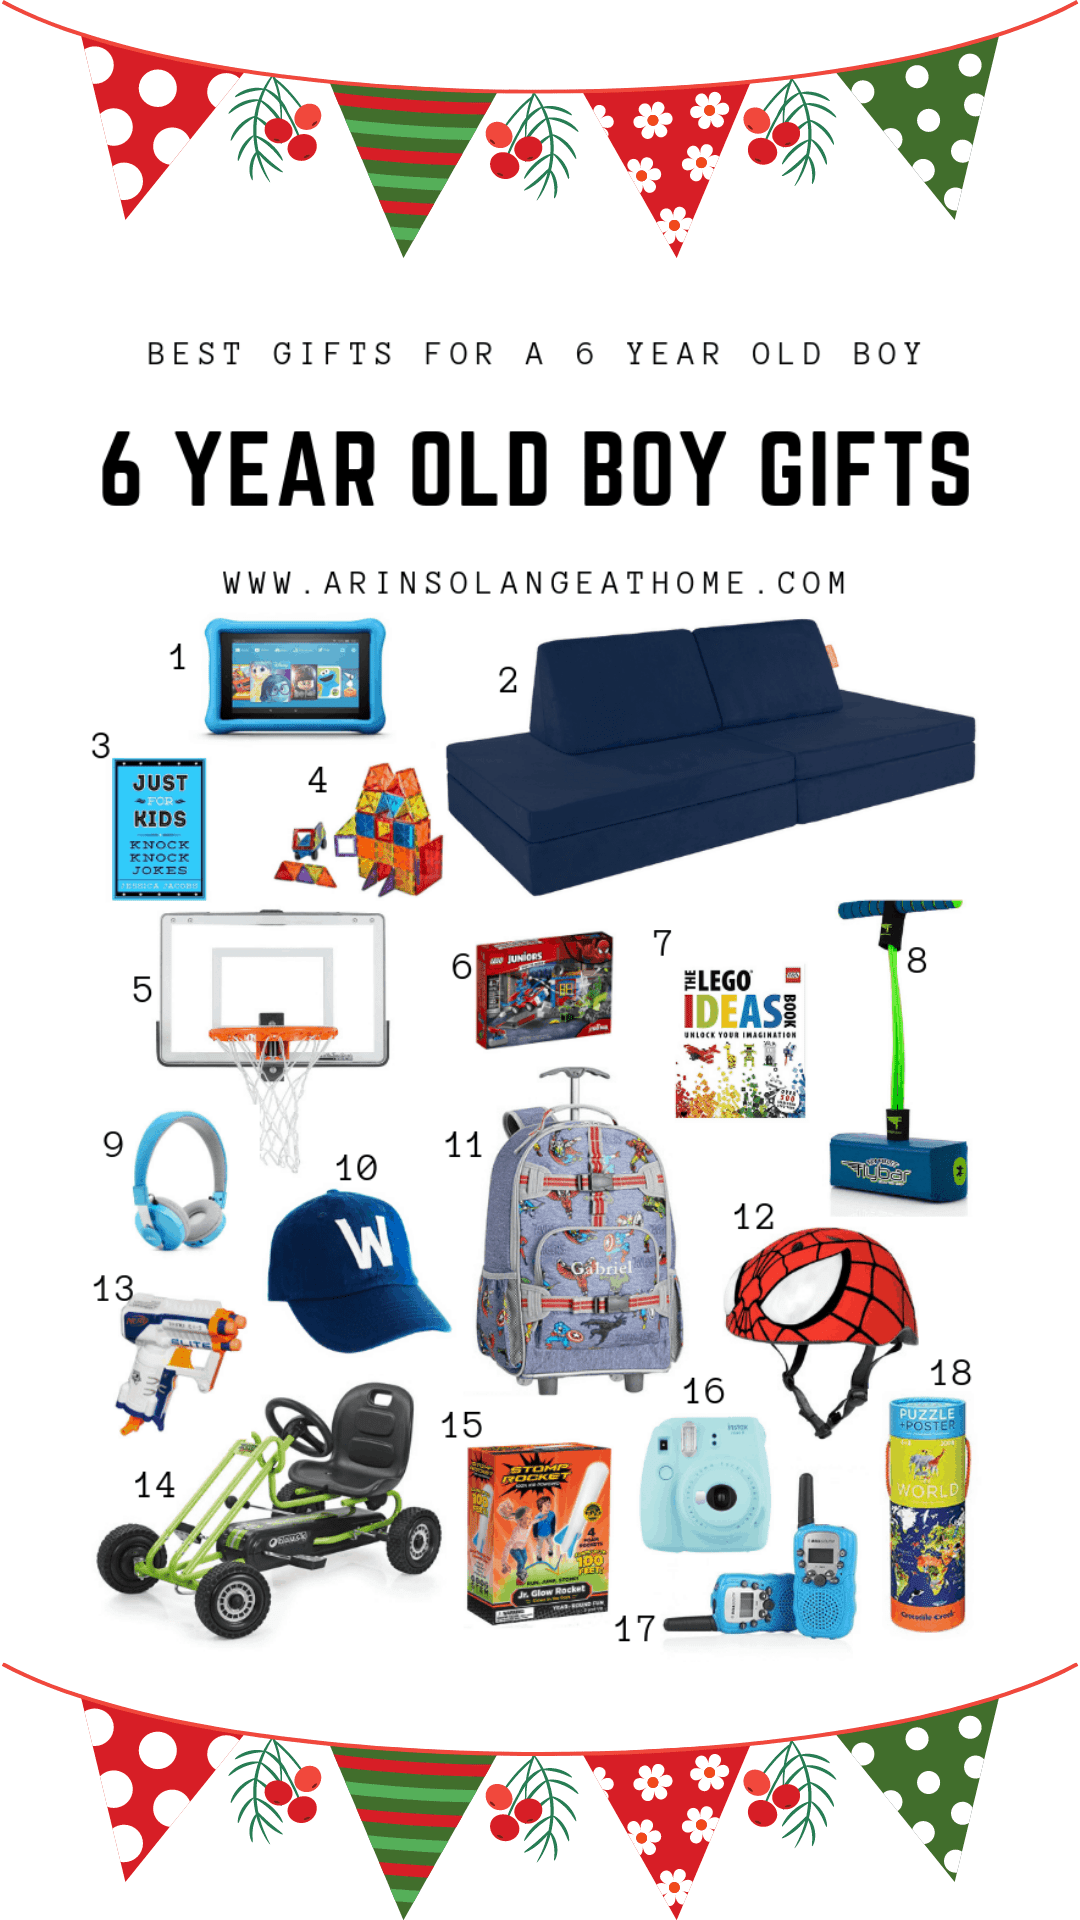 13 Cool Gifts For 6 Year Old Boys